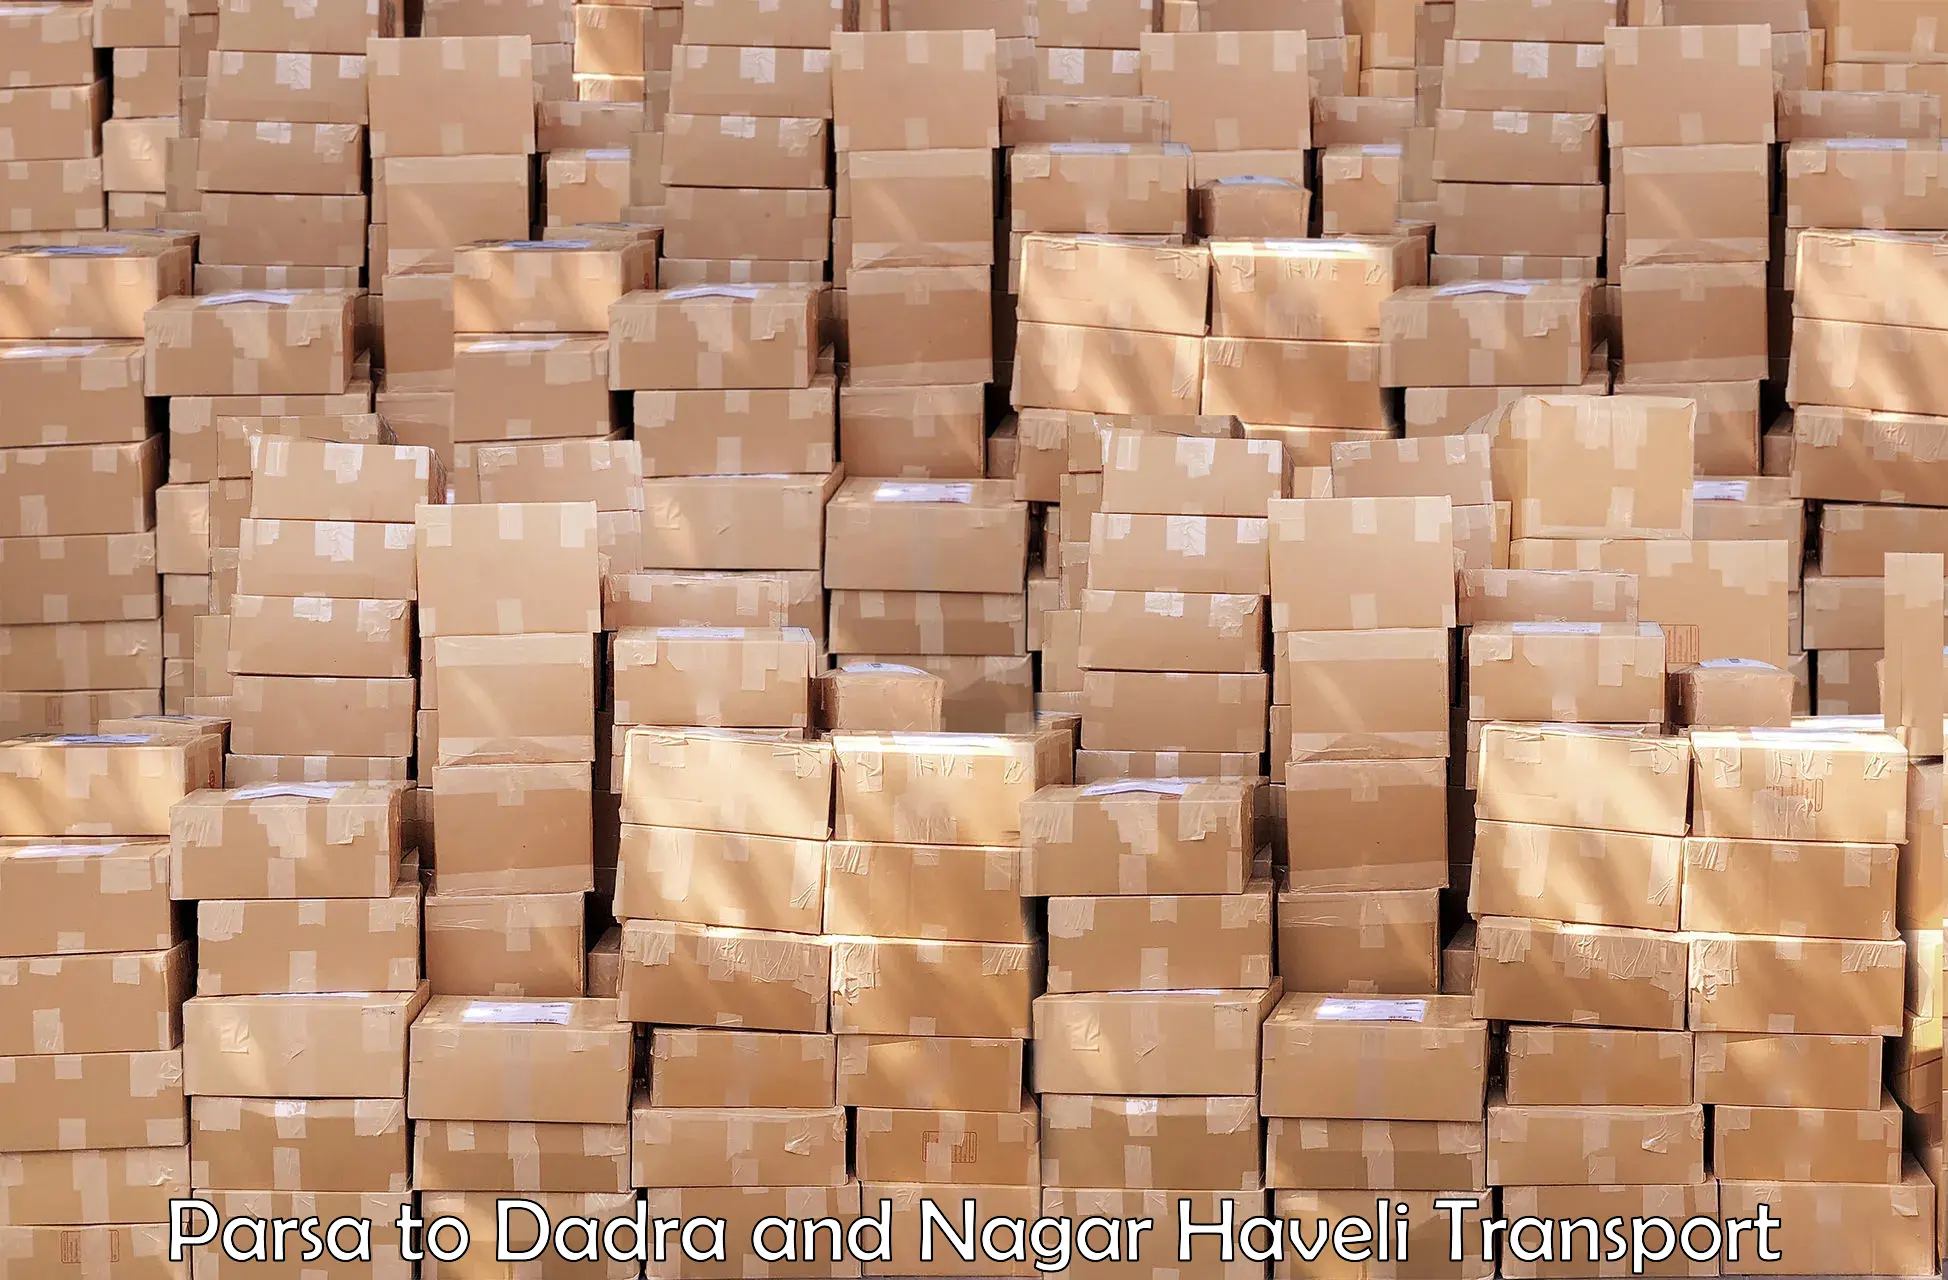 Container transport service Parsa to Dadra and Nagar Haveli